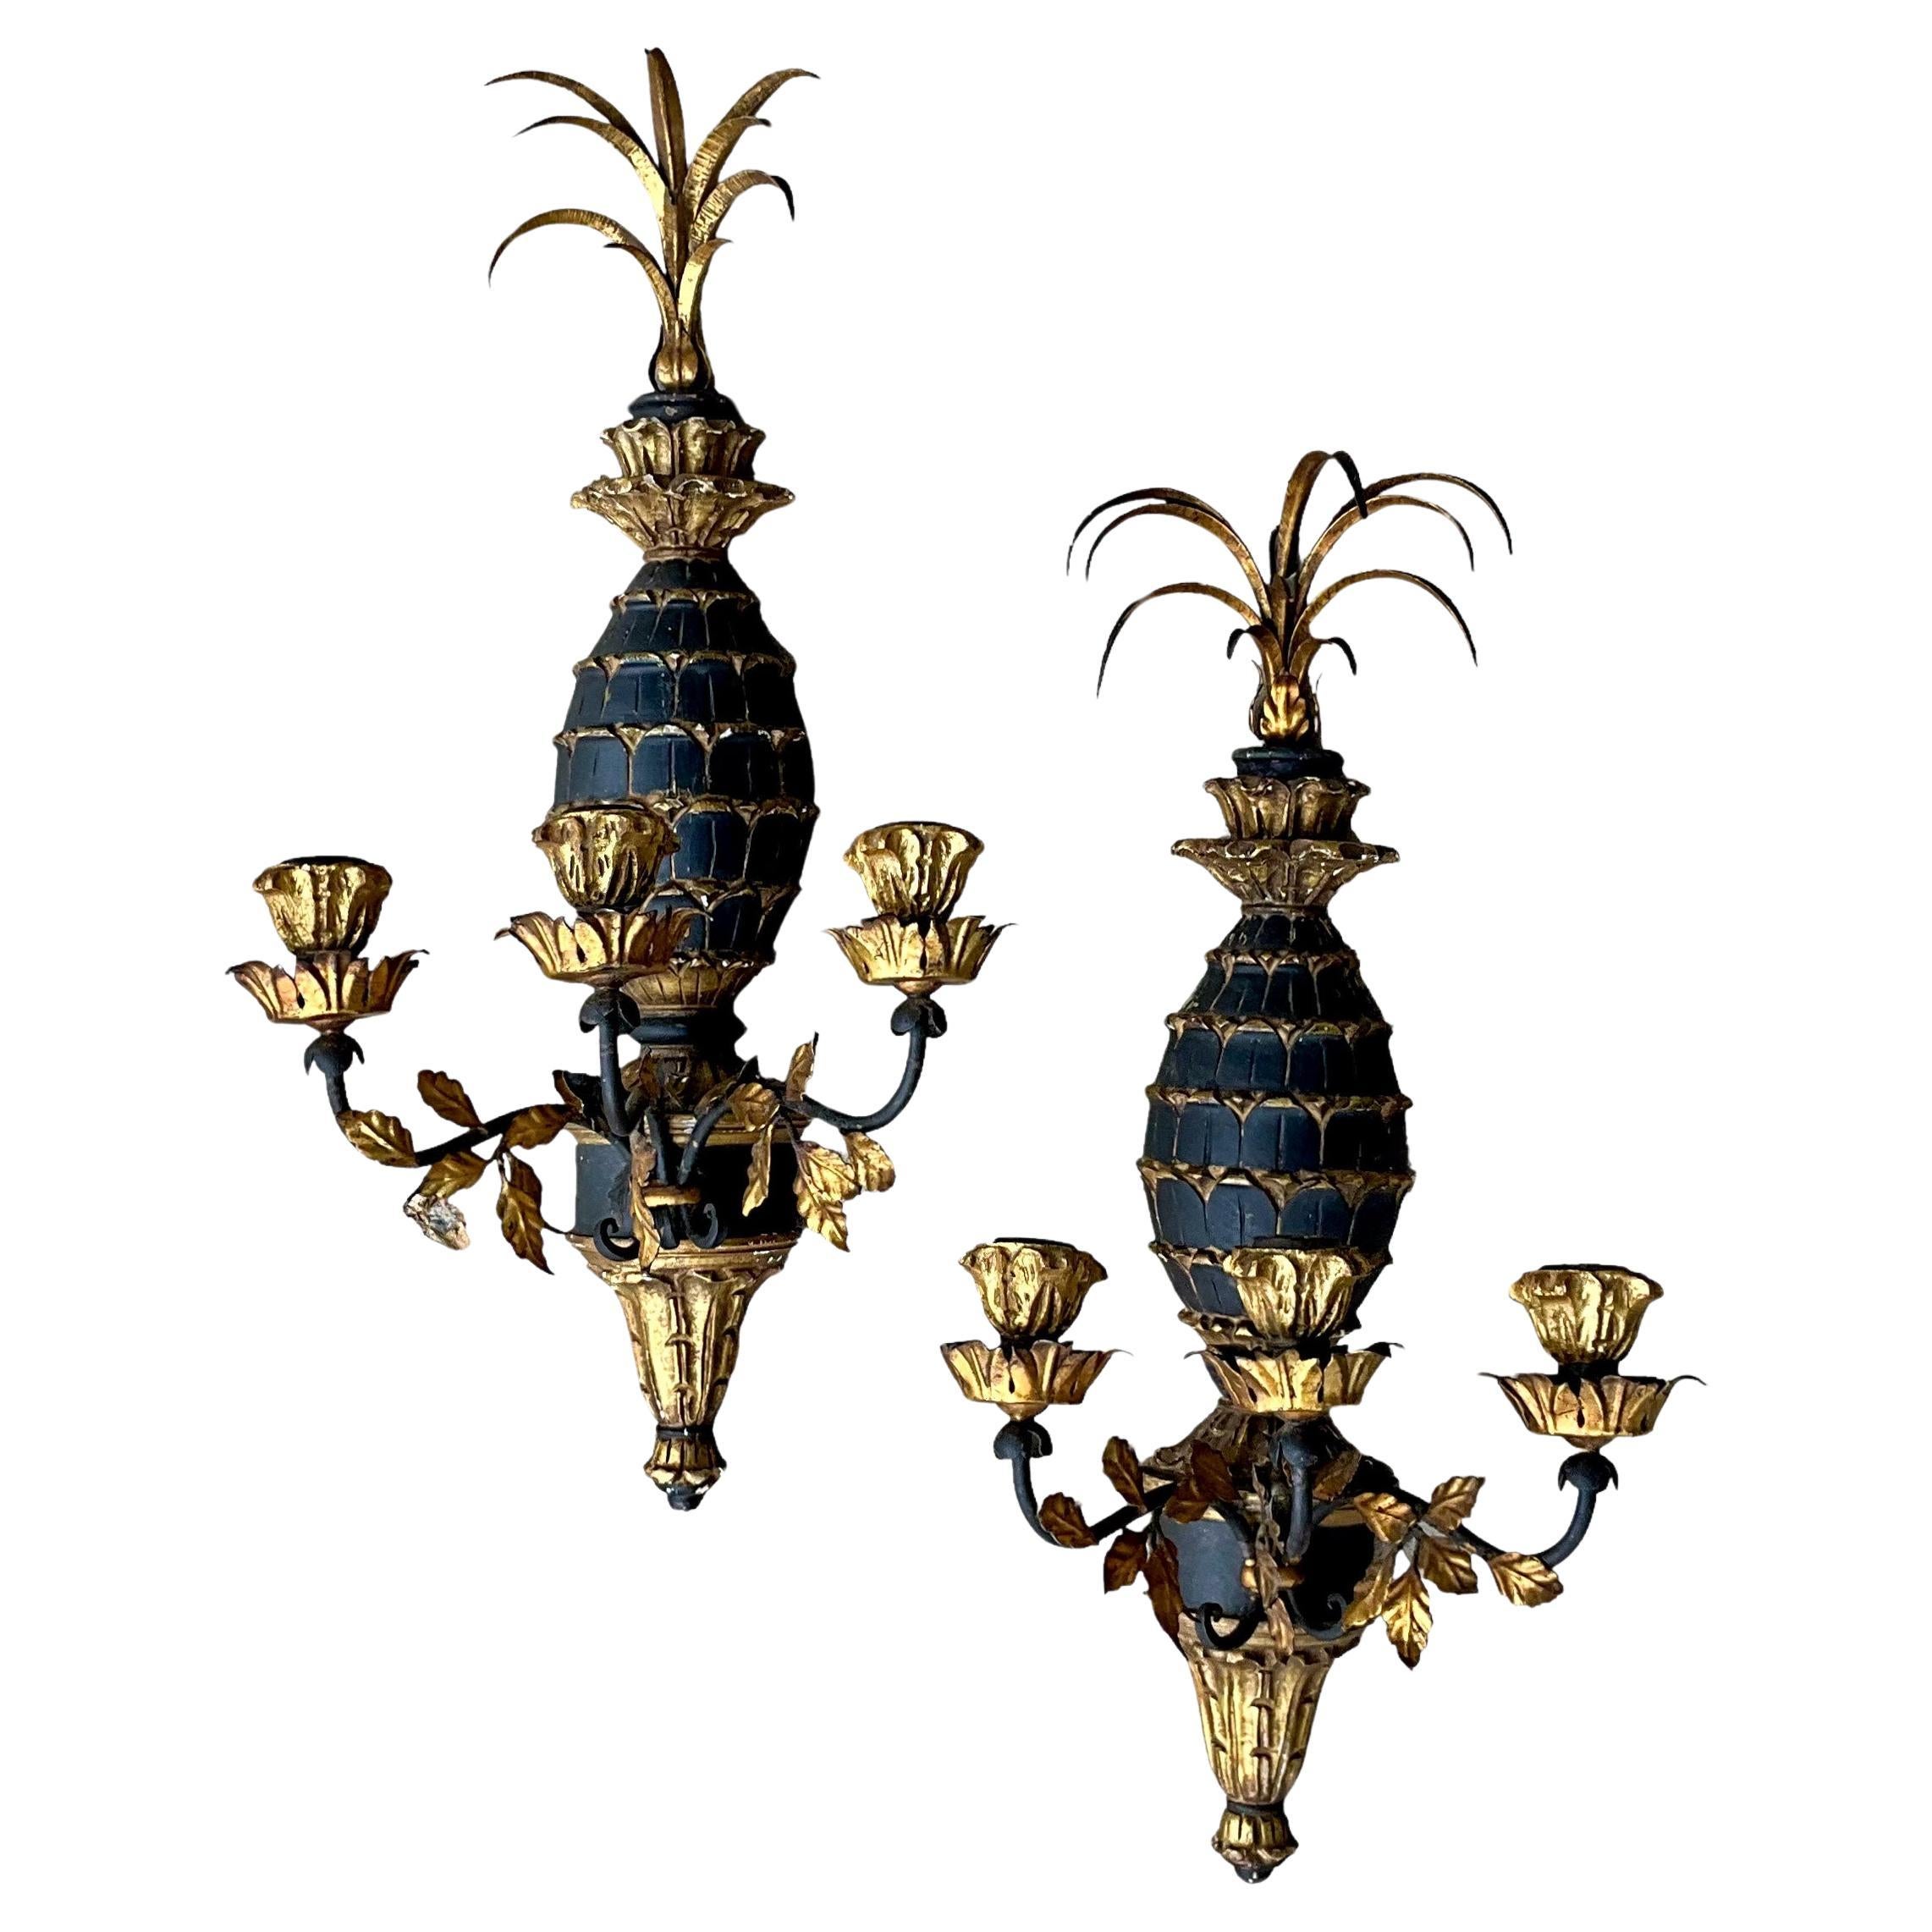 Italian Regency Style Carved Giltwood Pineapple & Gilt Metal Tole Sconces -Pair For Sale